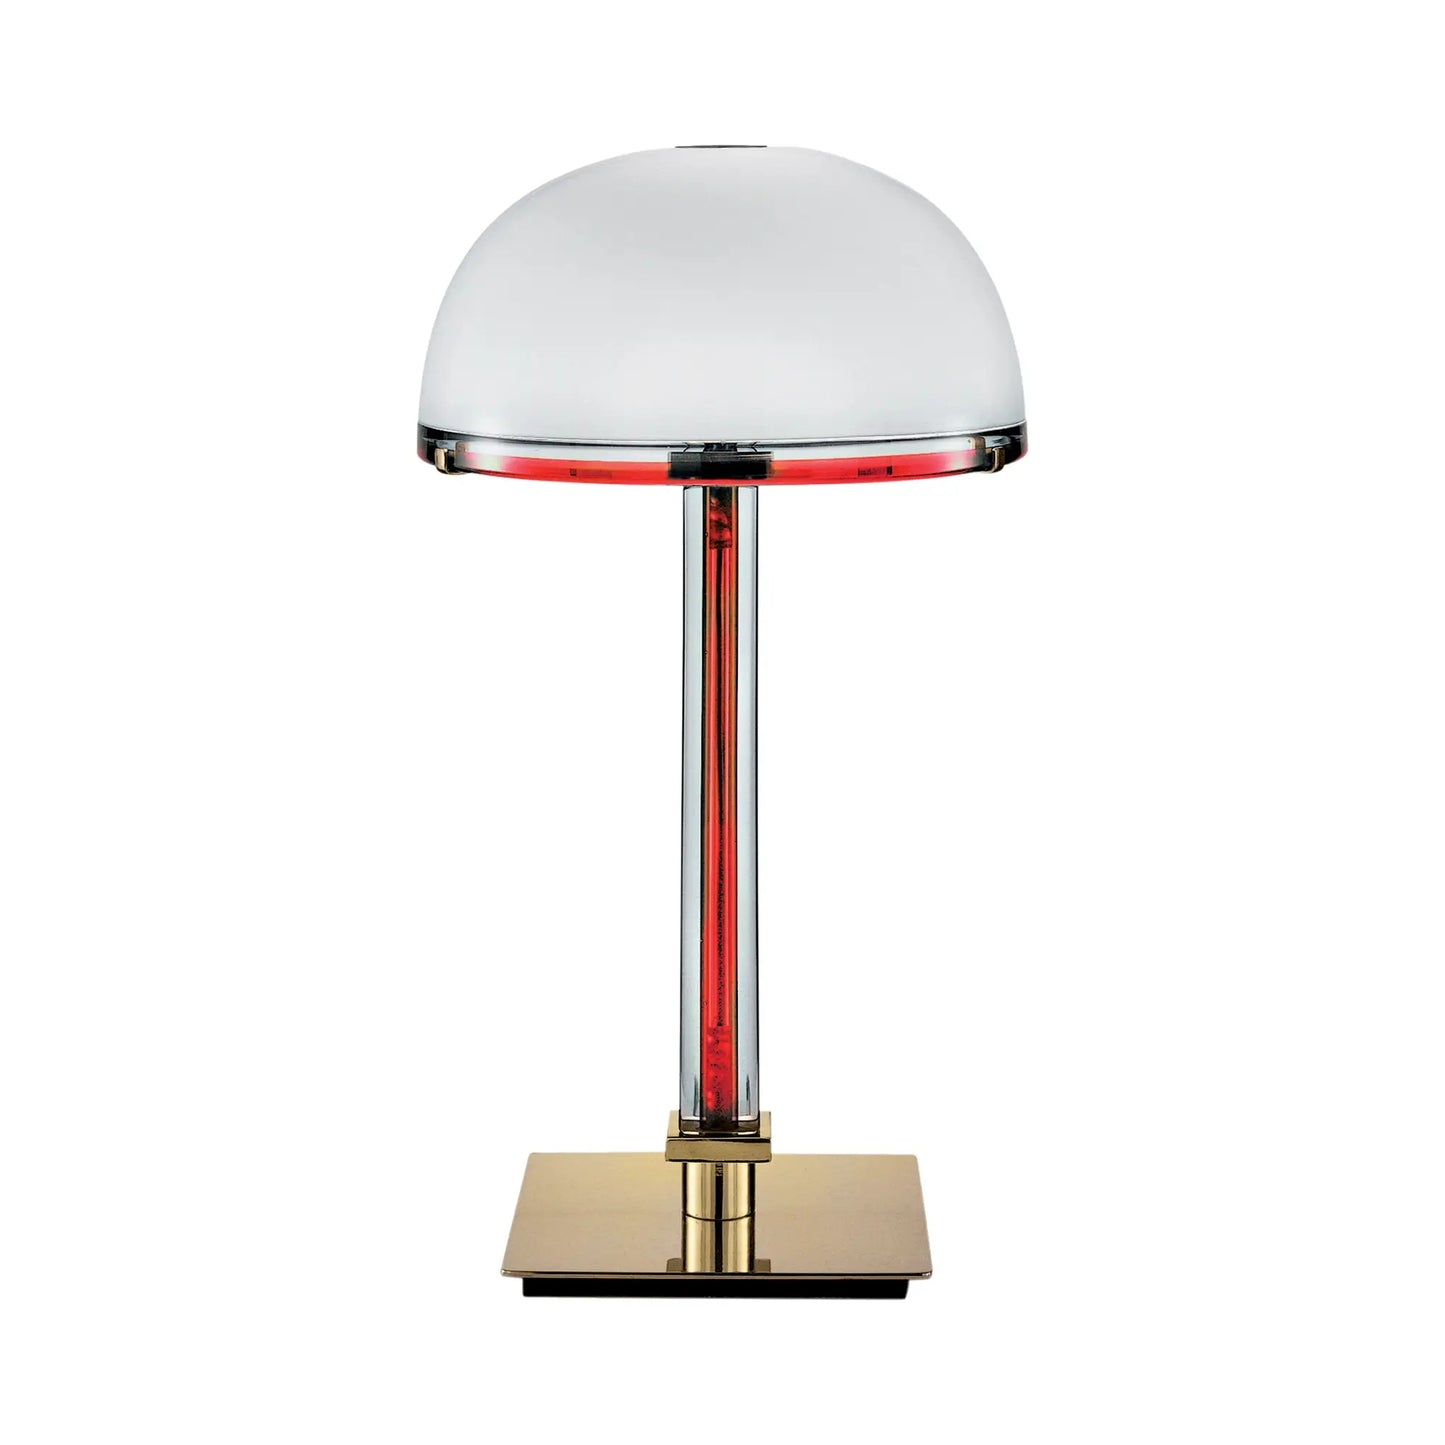 Belboi Murano Glass Table Lamp with Gold-Plated Metal Base